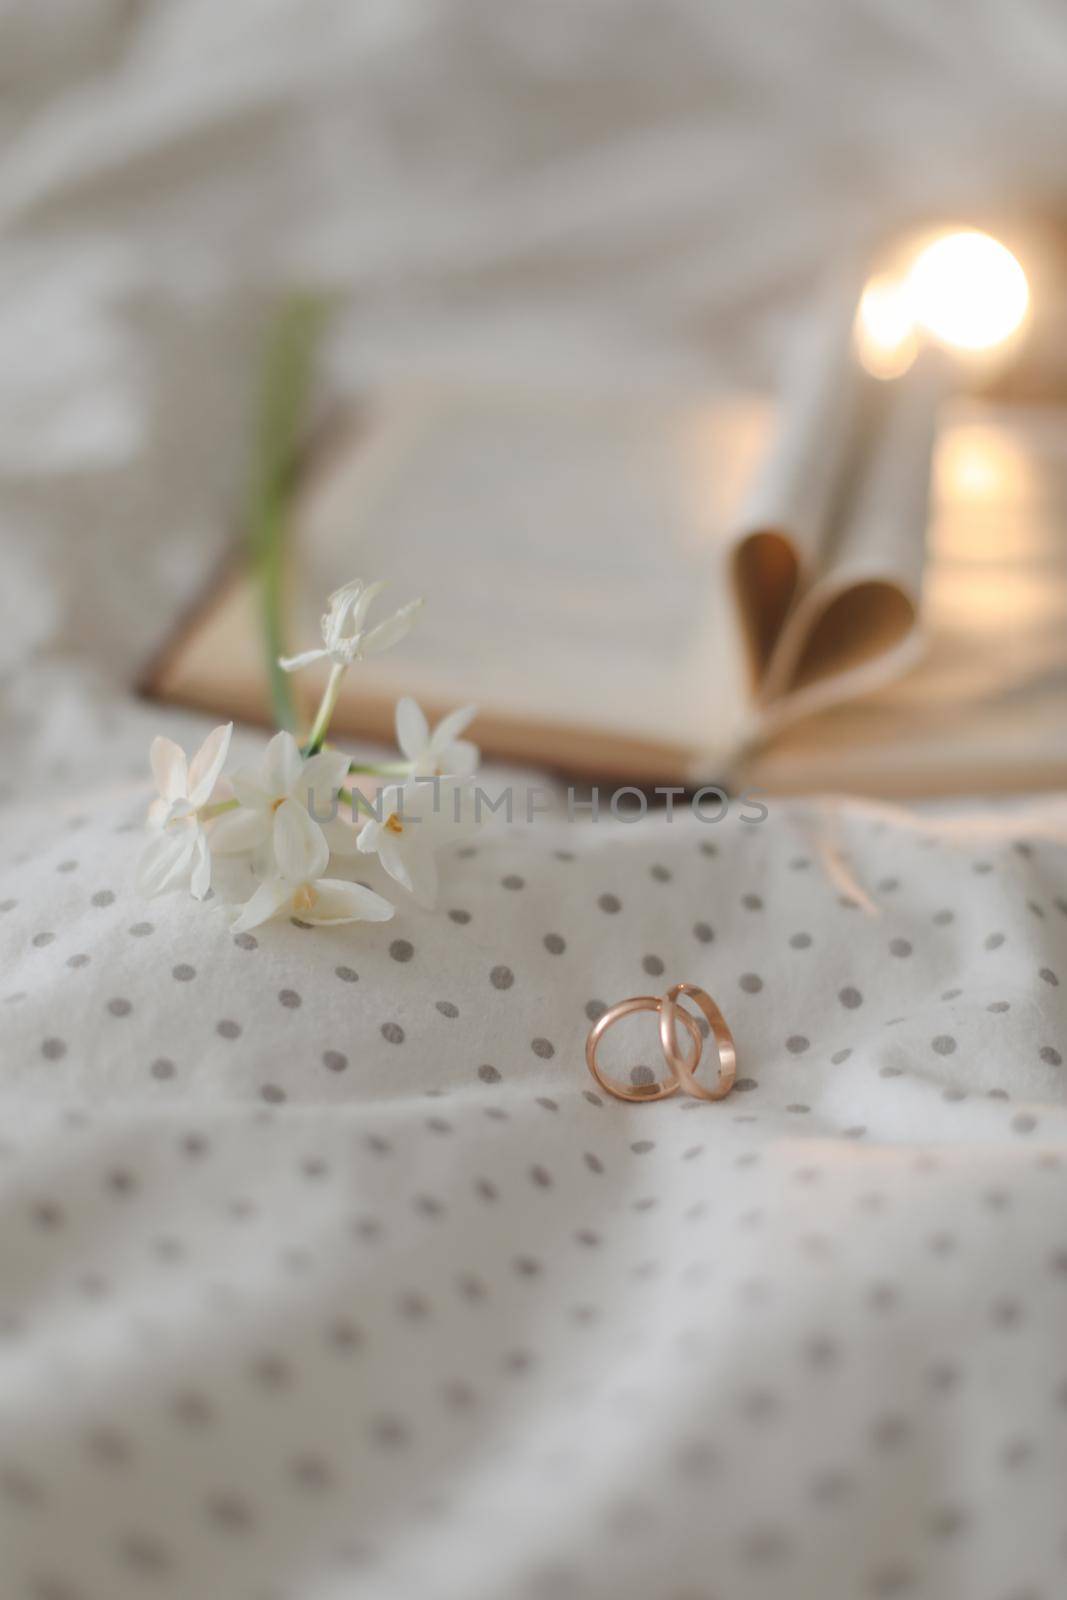 Golden ring and open book with folded sheets in heart shape in bed. Wedding concept, Happy Valentine's Day.